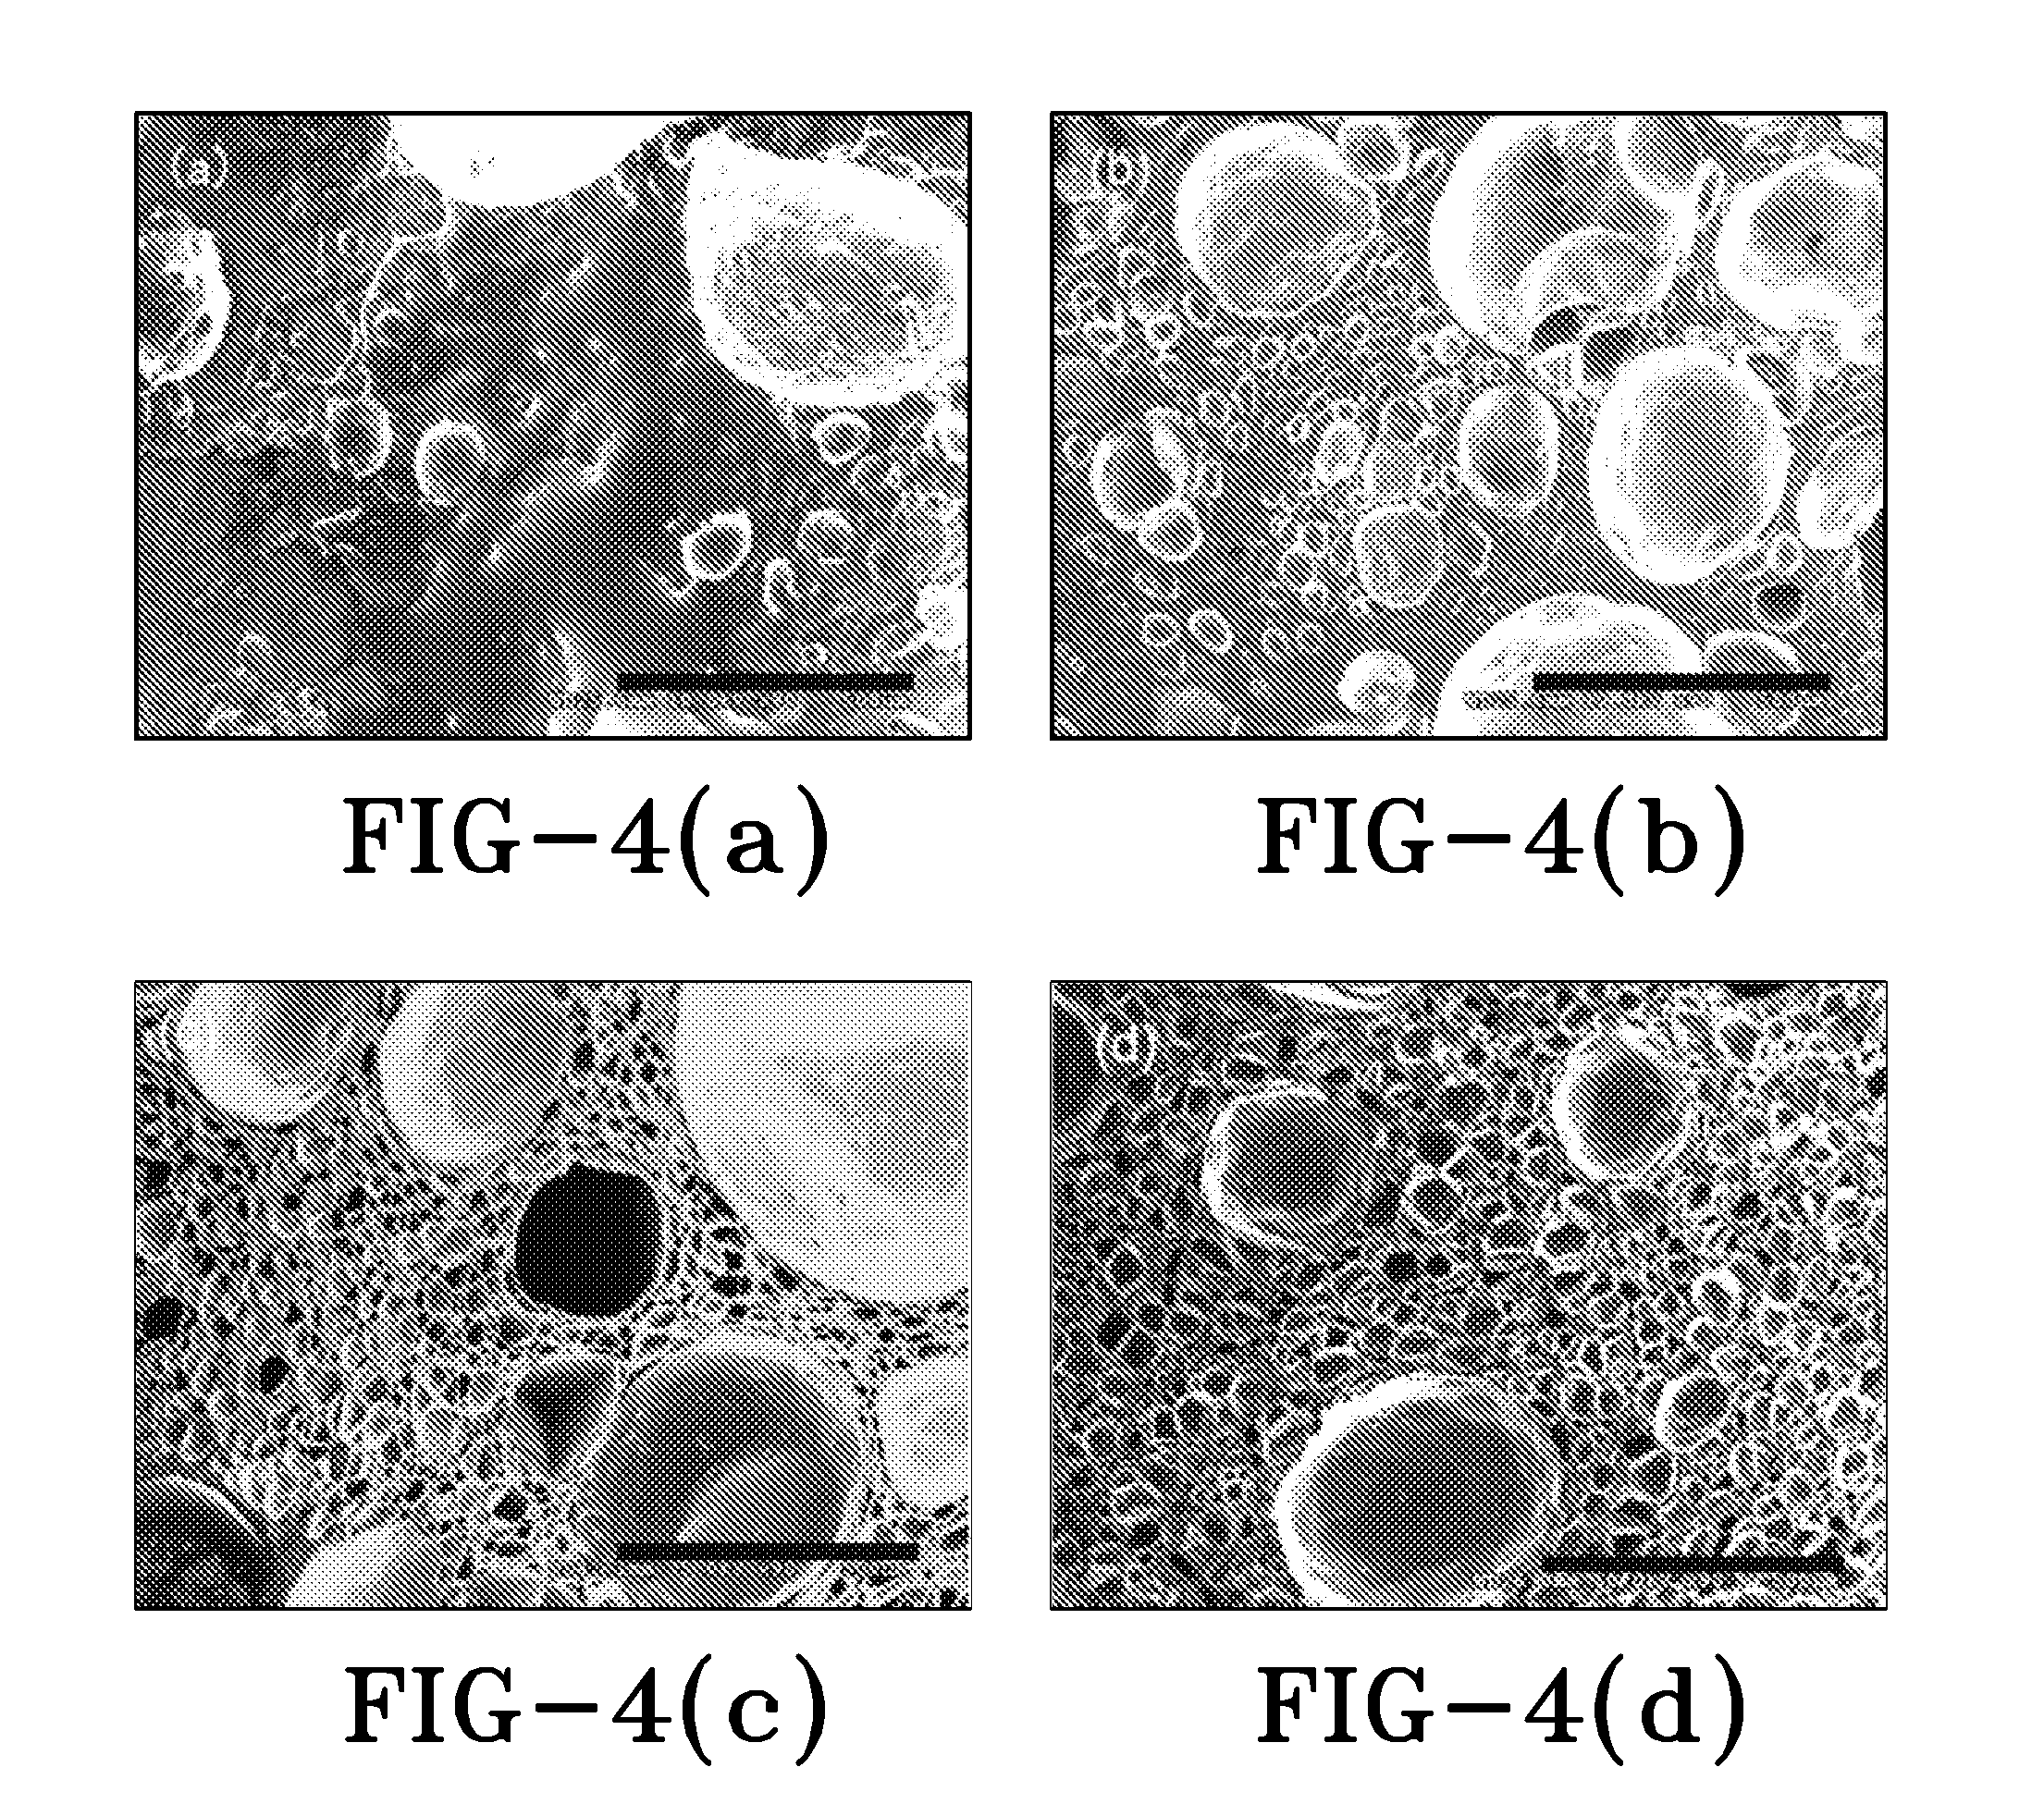 Suspension polymerization and foaming of water containing activated carbon-nano/microparticulate polymer composites